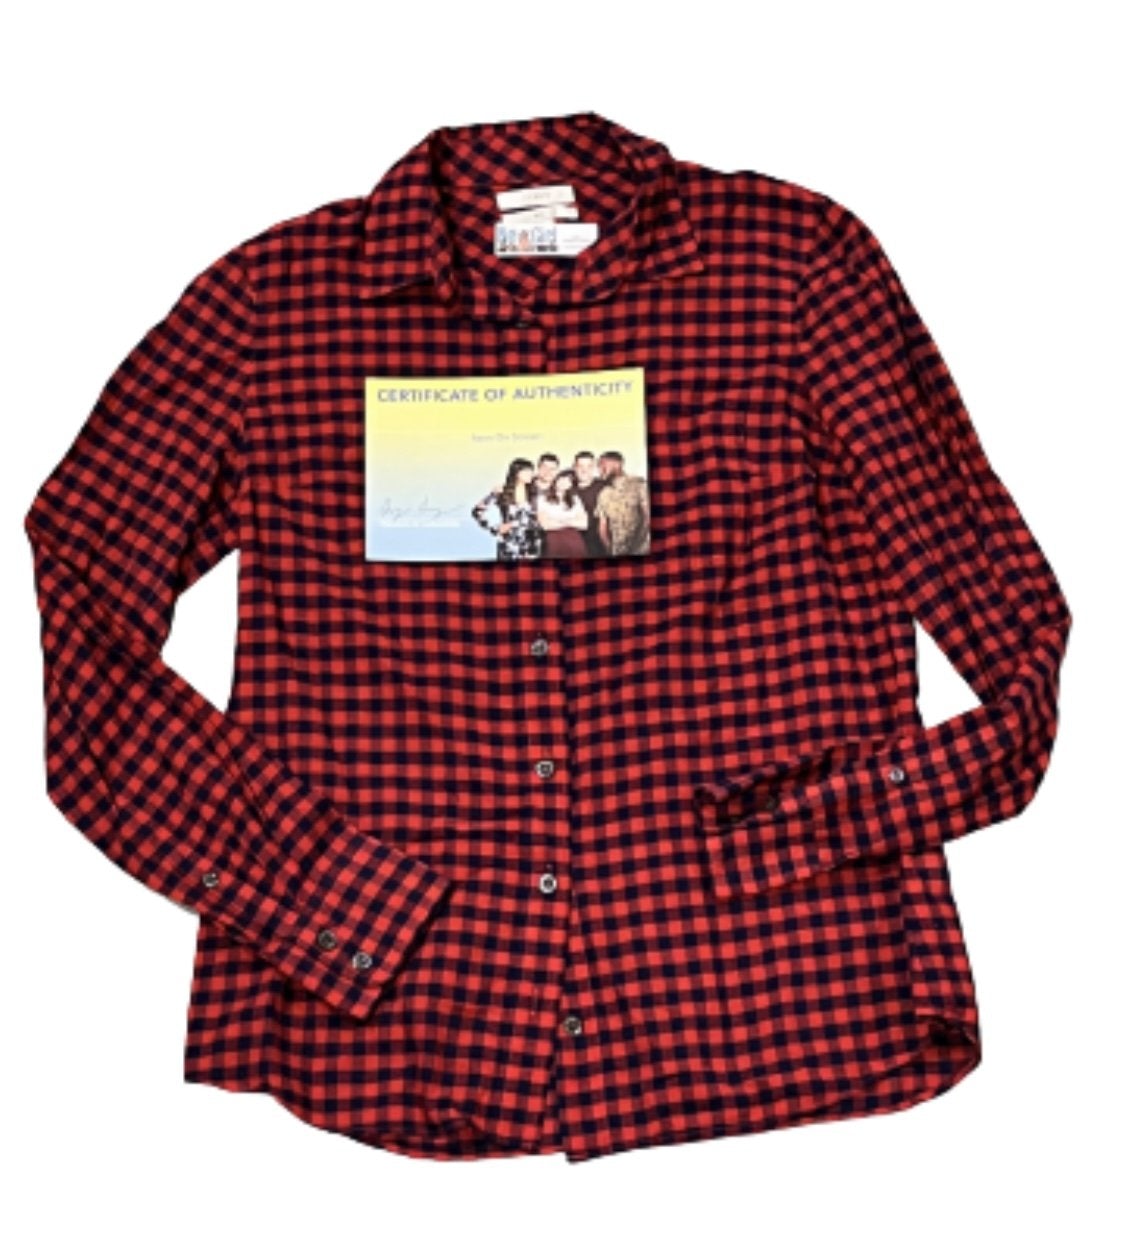 NEW GIRL: Jessica Day's J Crew Red Plaid Holiday Shirt (4)